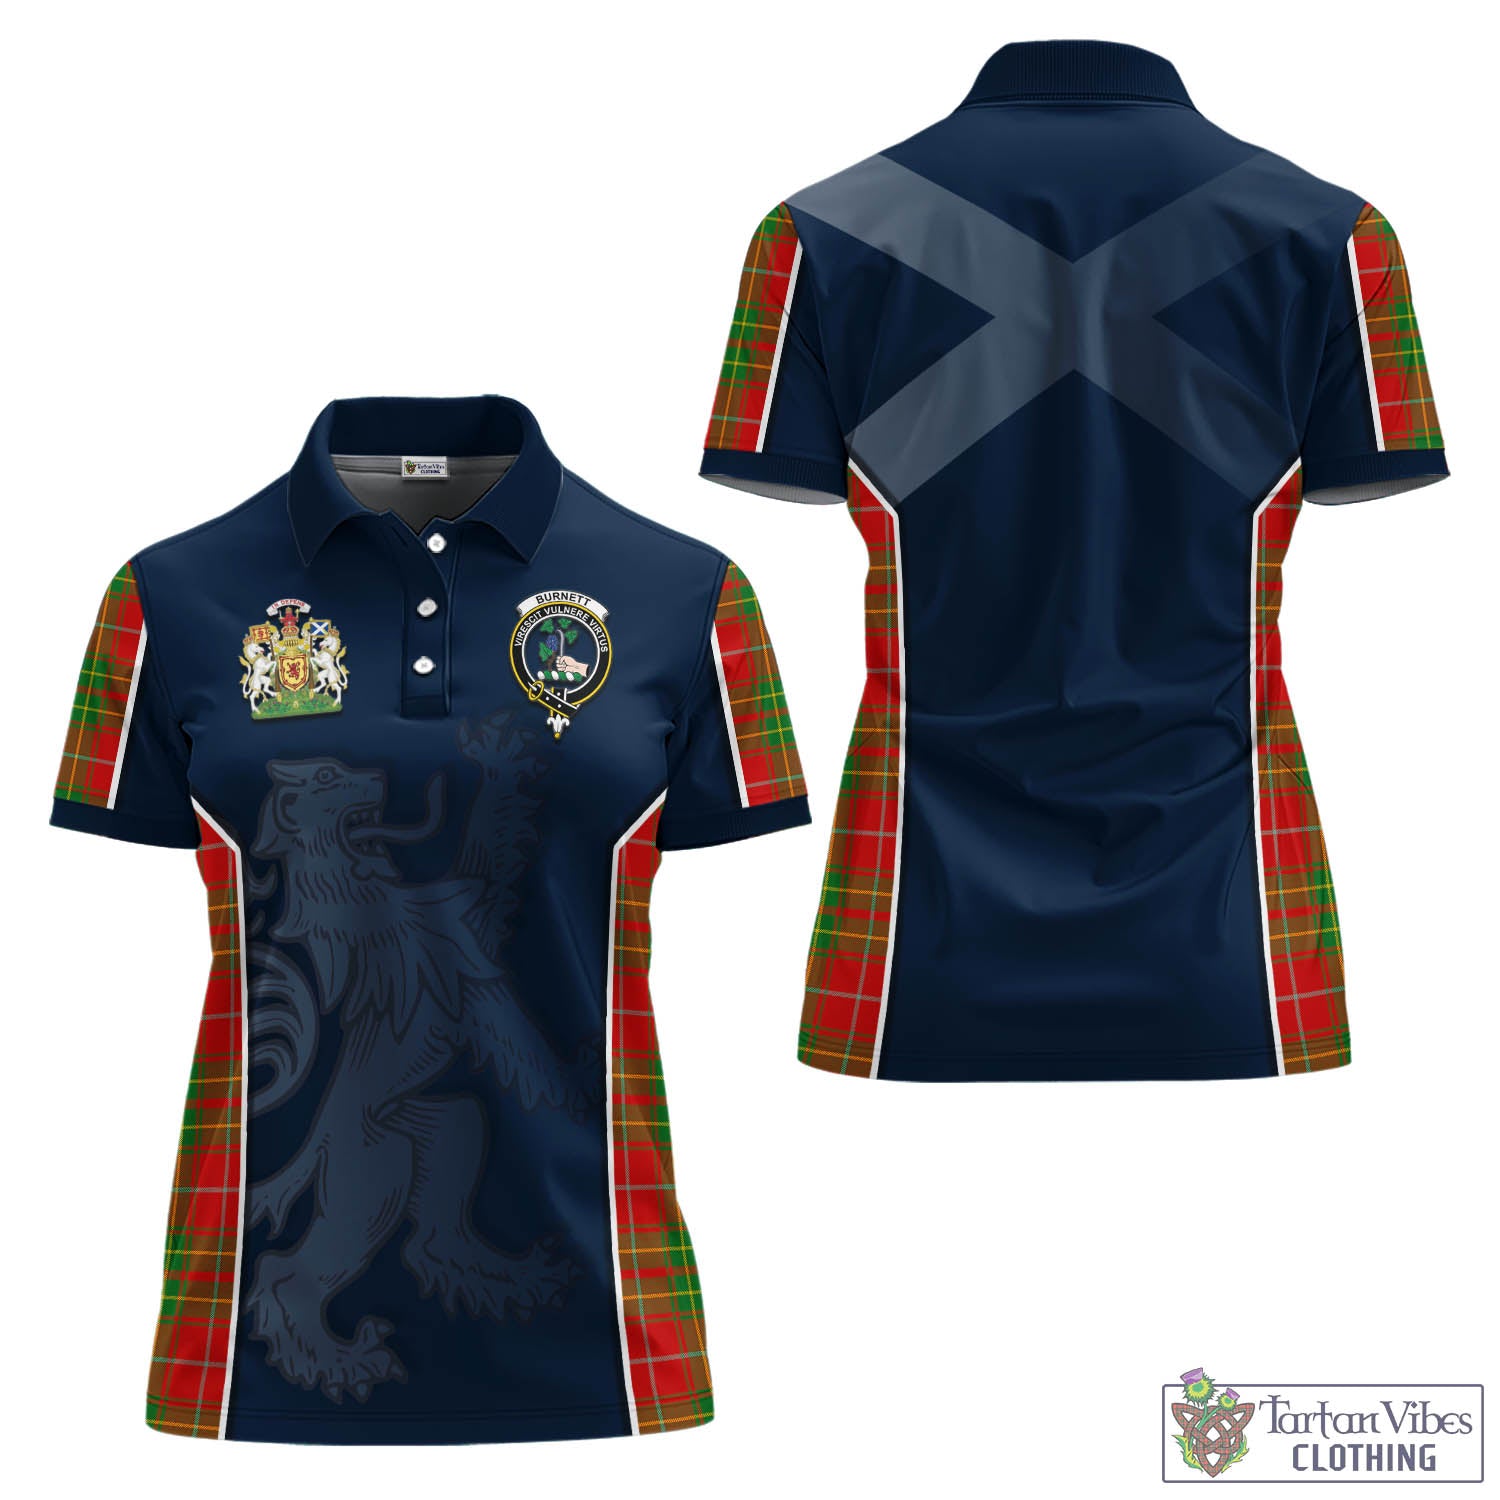 Tartan Vibes Clothing Burnett Ancient Tartan Women's Polo Shirt with Family Crest and Lion Rampant Vibes Sport Style